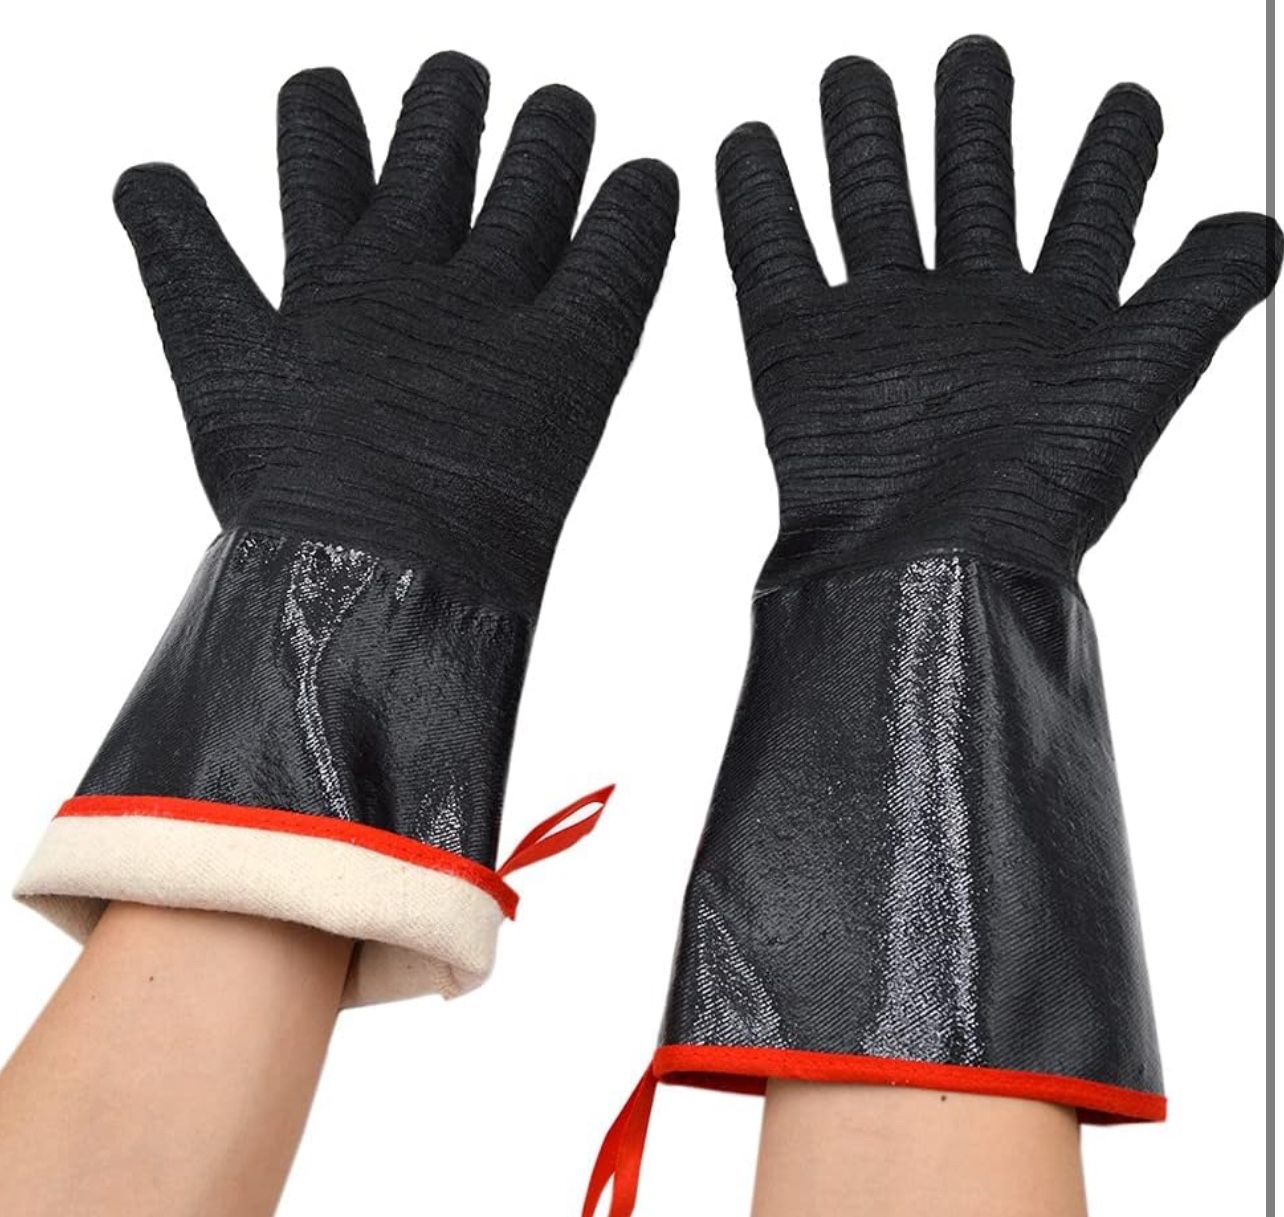 Barbecue grill gloves, 932 ℉, heat resistant, waterproof gloves for turkey fryer, bake with non-slip textured grip (18 inches